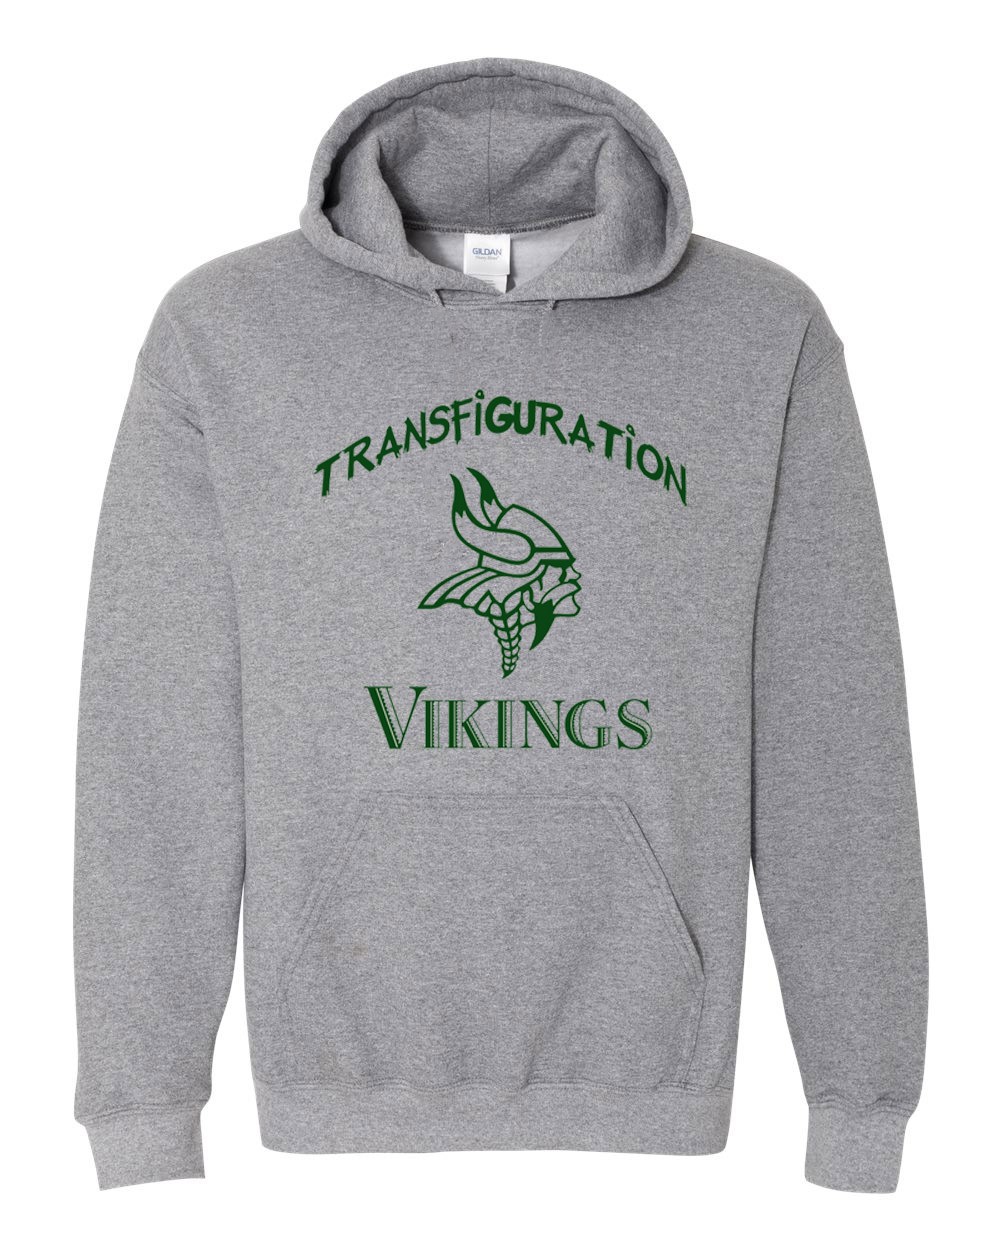 Transfiguration Spirit Wear Pullover Hoodie w/ Logo - Please Allow 2-3 Weeks for Delivery